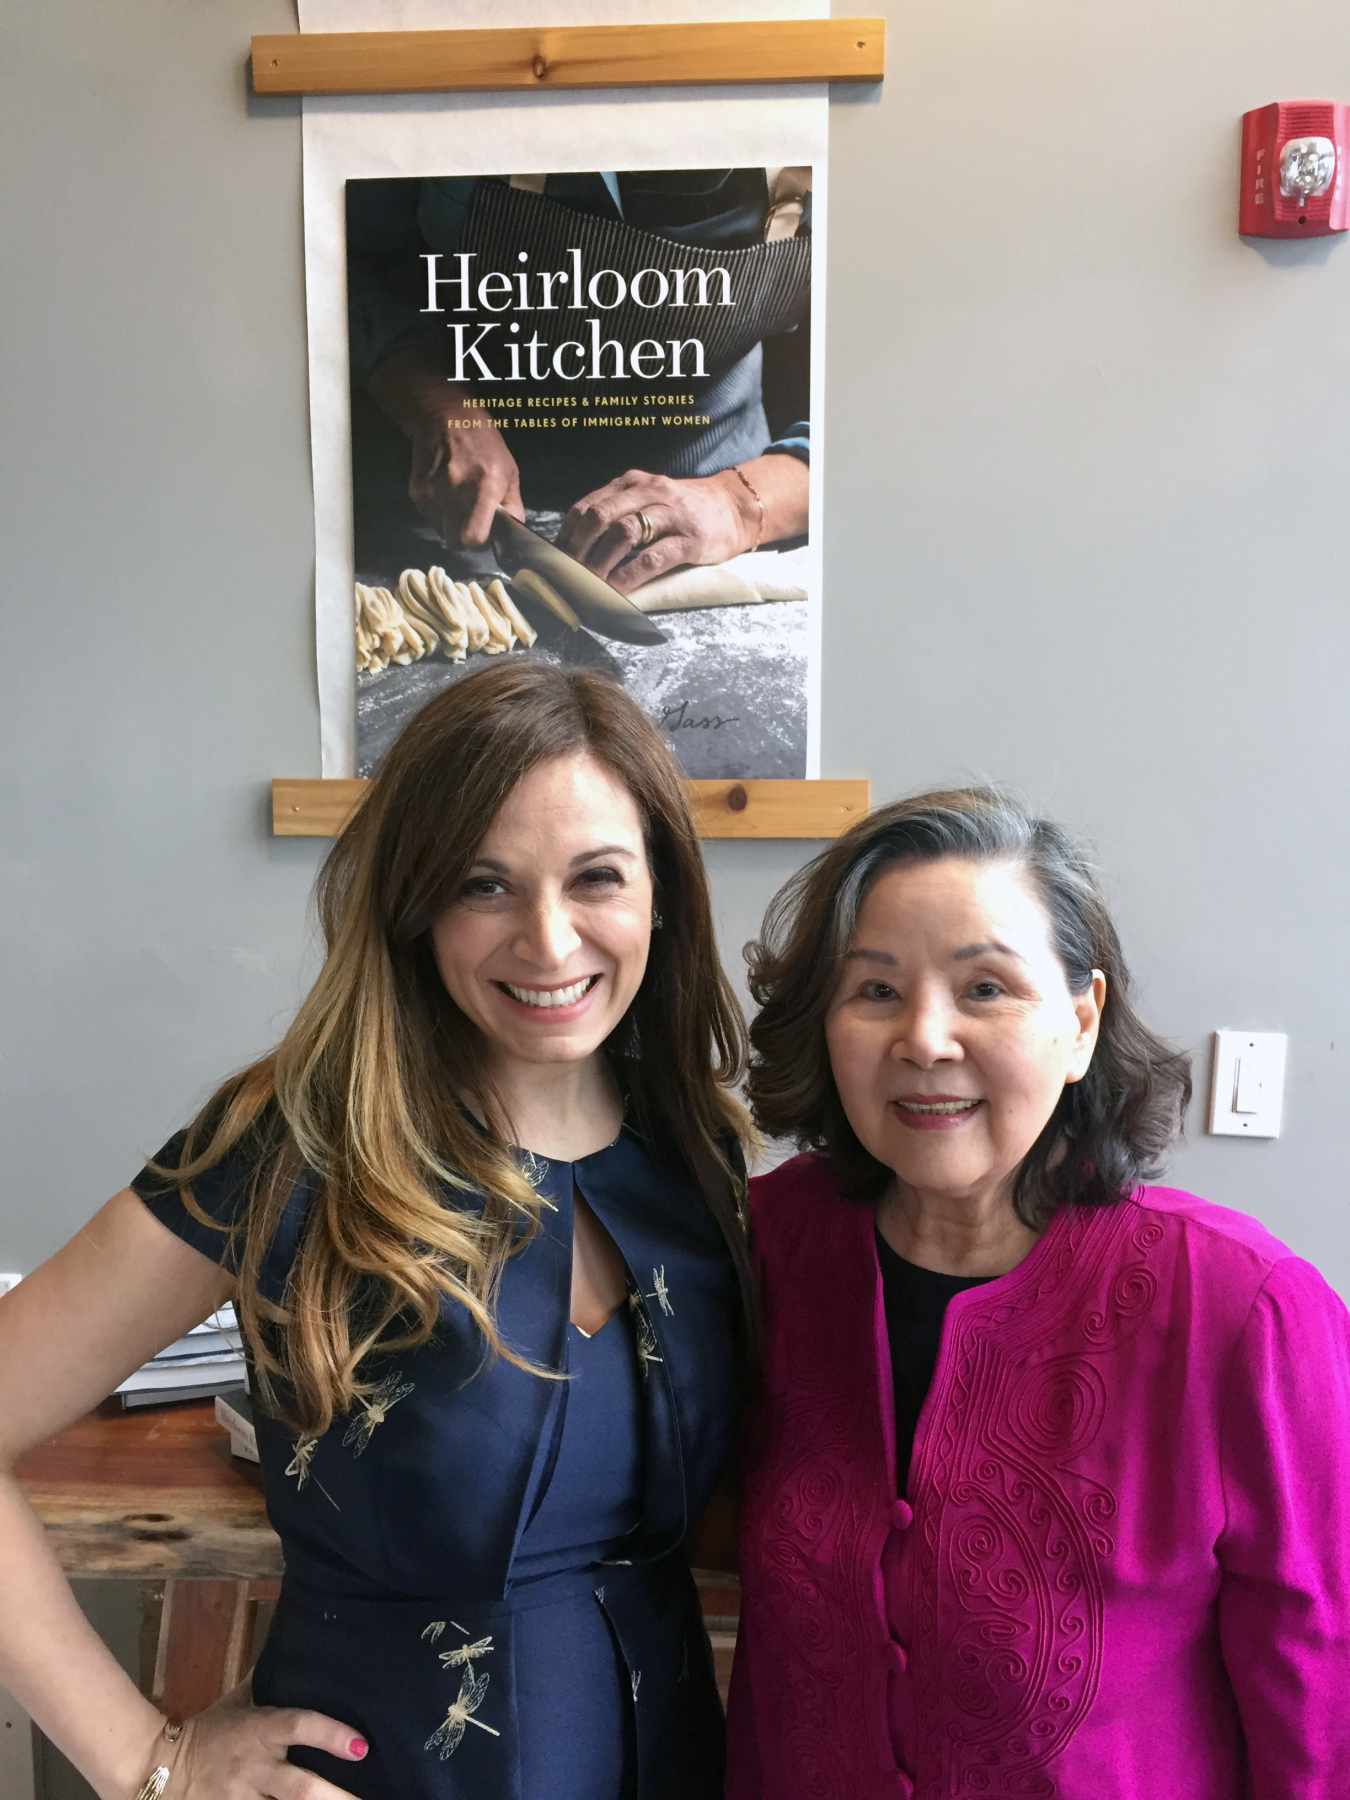 Published home cook Tina Yao's recipes are featured in Anna Gass' Heirloom Kitchen: Heritage Recipes and Family Stories from the Tables of Immigrant Women